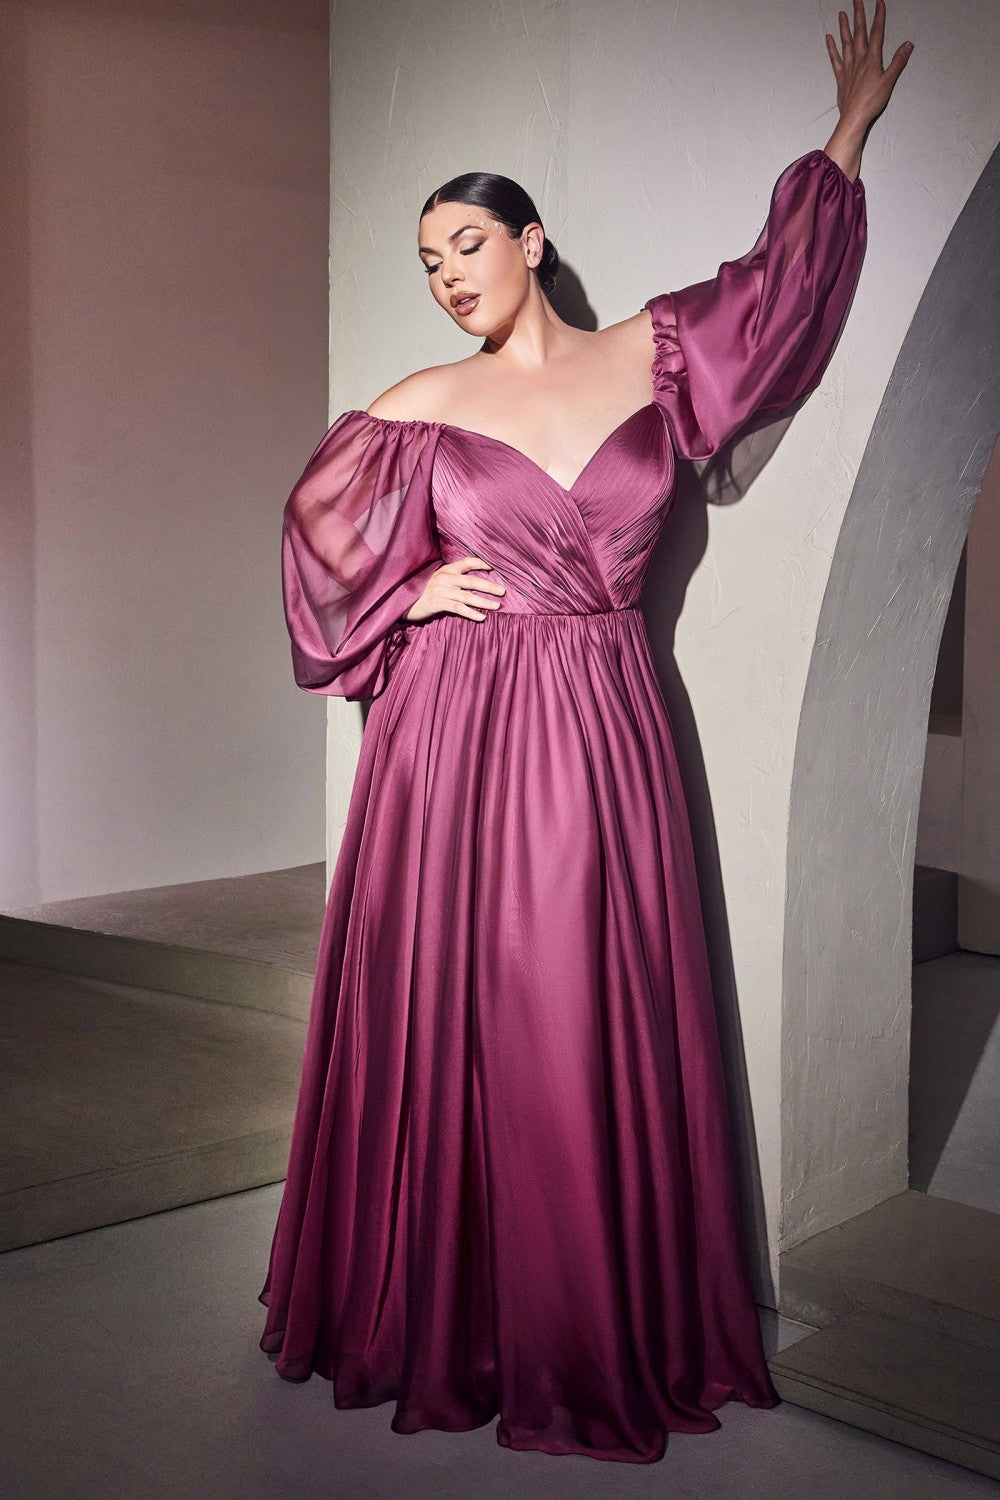 Elegant Long Sleeves A-line Chiffon Gown, Plus Size Luxury Royal Style-smcdress